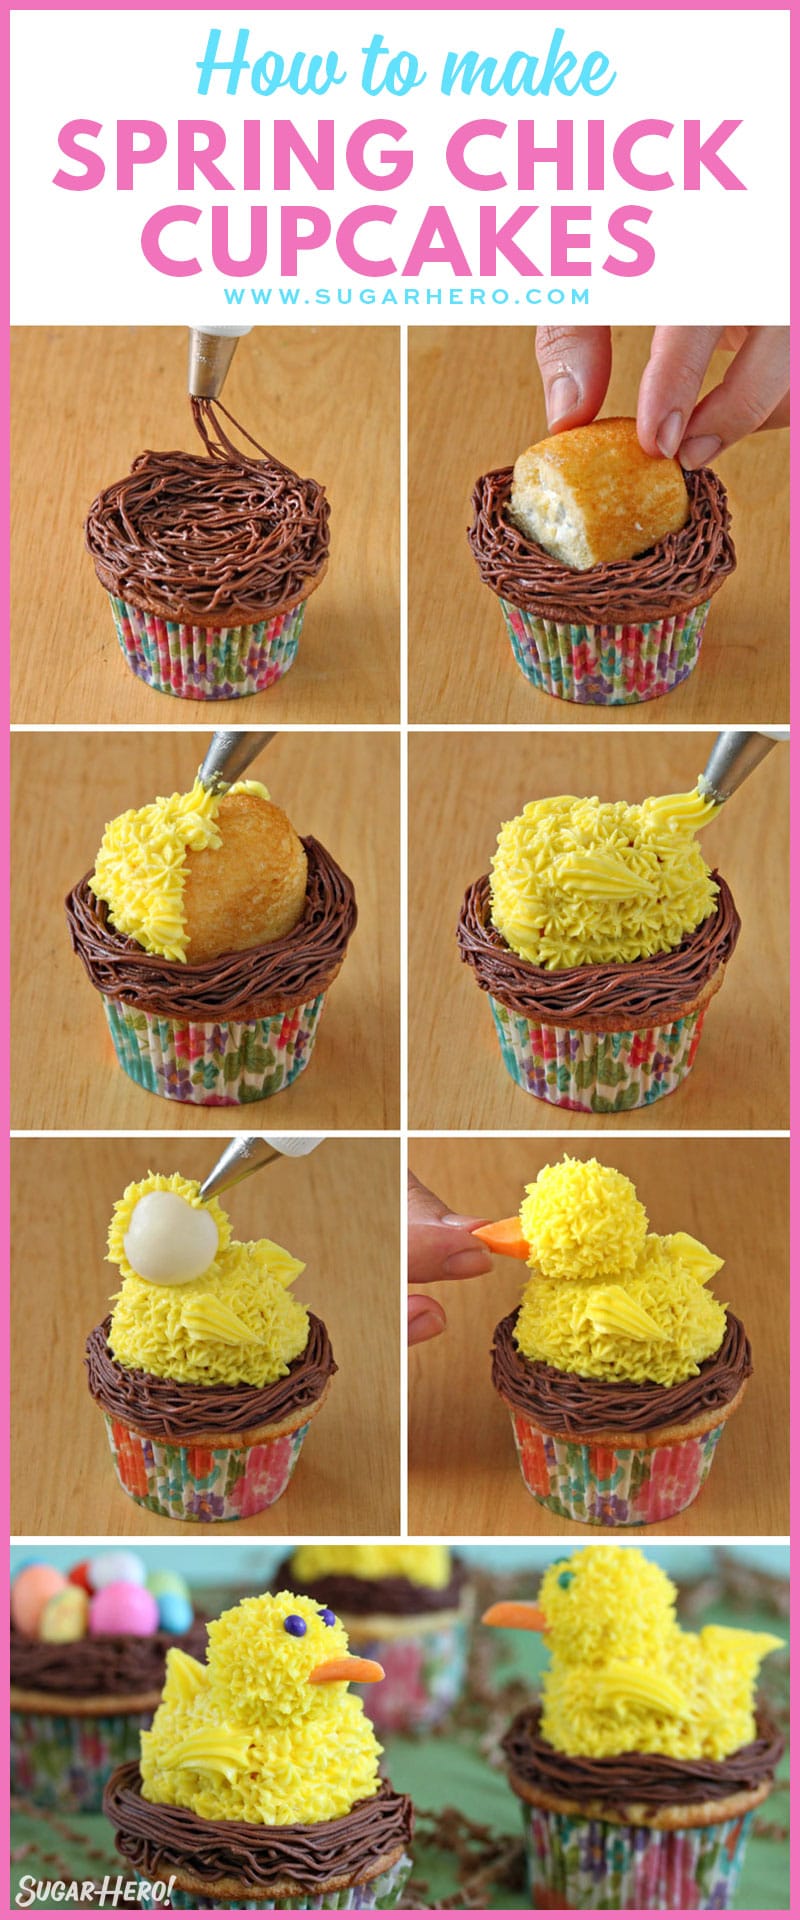 How to Make Spring Chick Cupcakes - step-by-step photo collage showing how to frost and decorate these Easter Cupcakes | From SugarHero.com